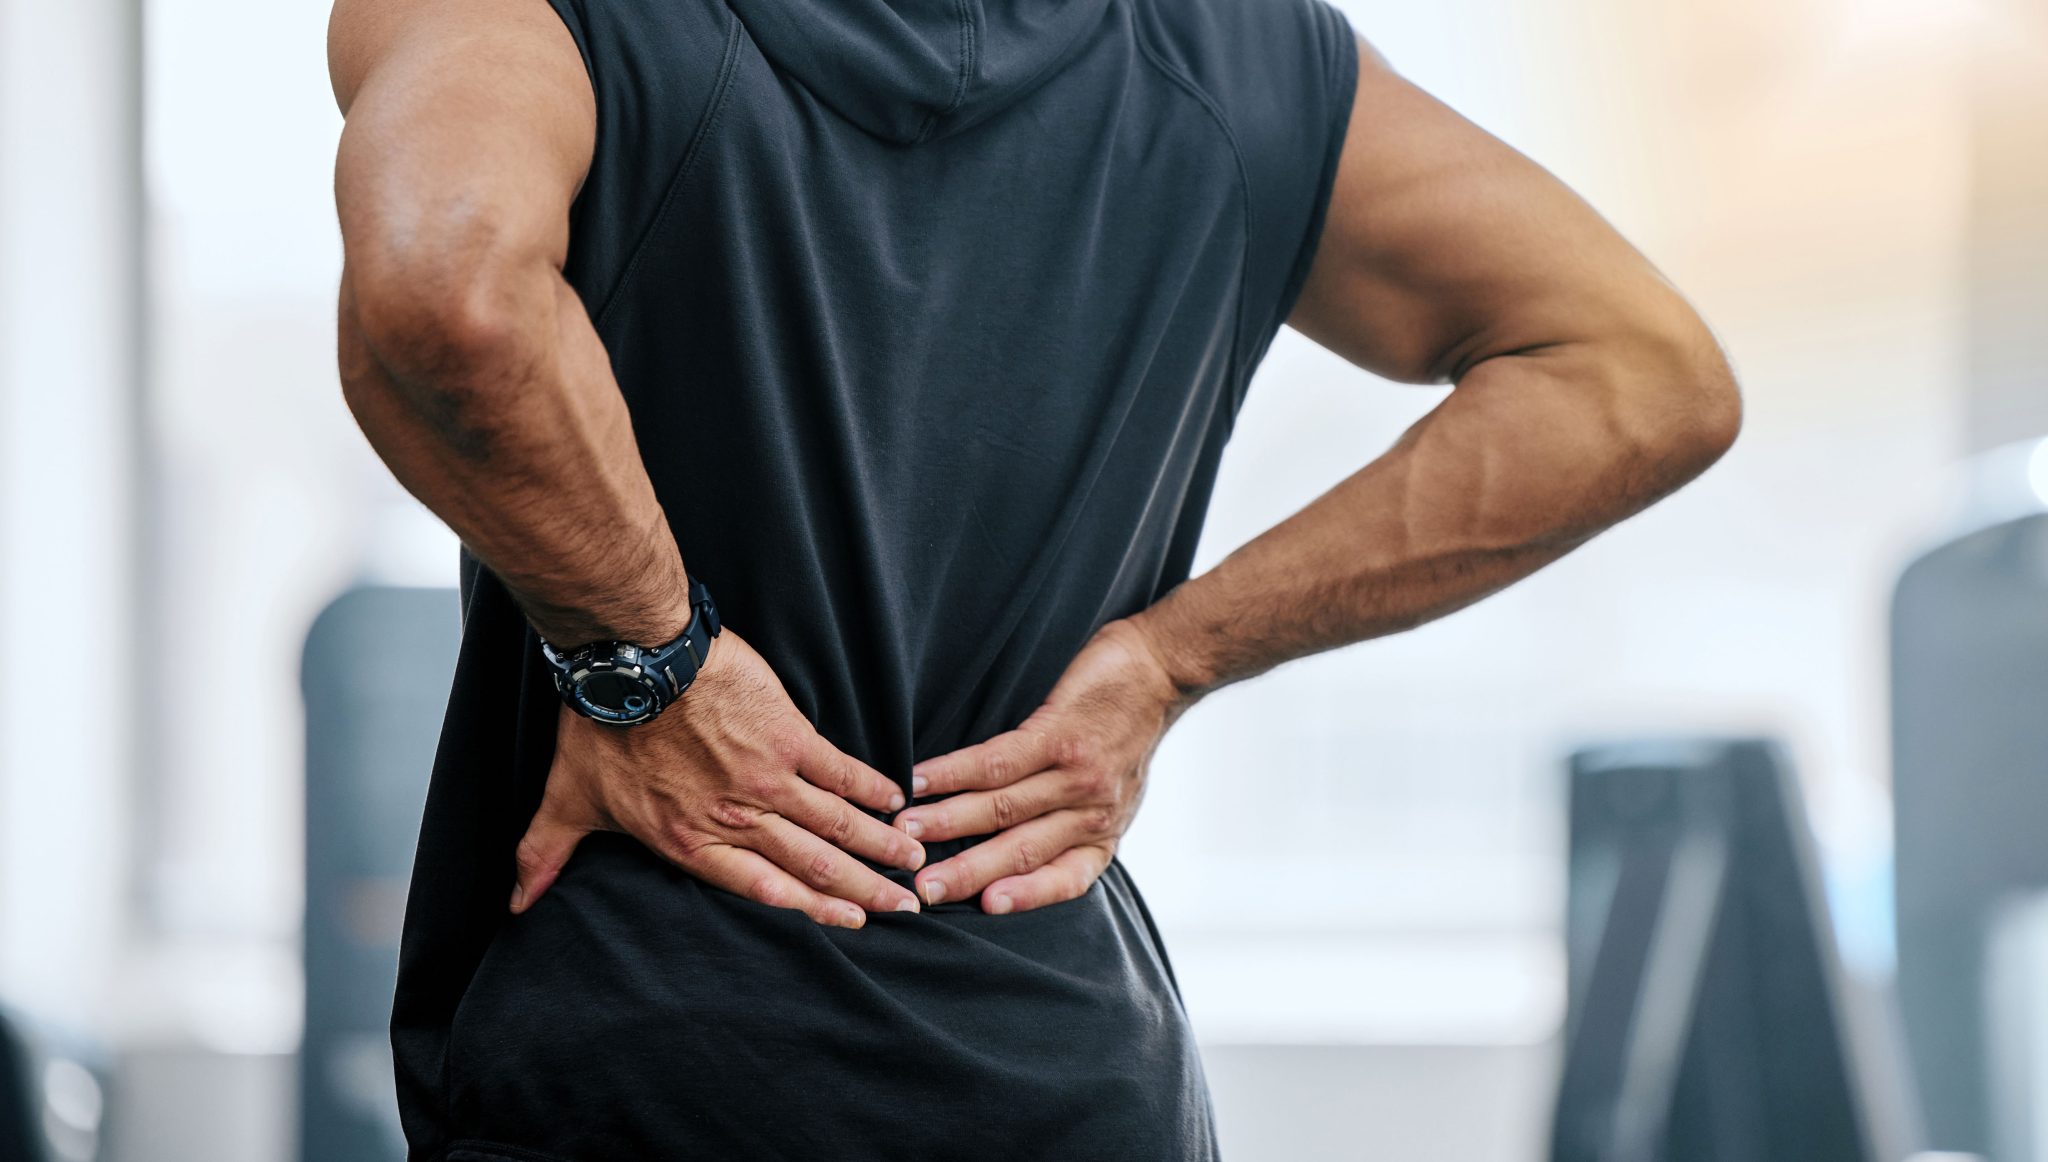 Low Back Pain When Weightlifting? 4 Ways Chiropractic Care Helps ...